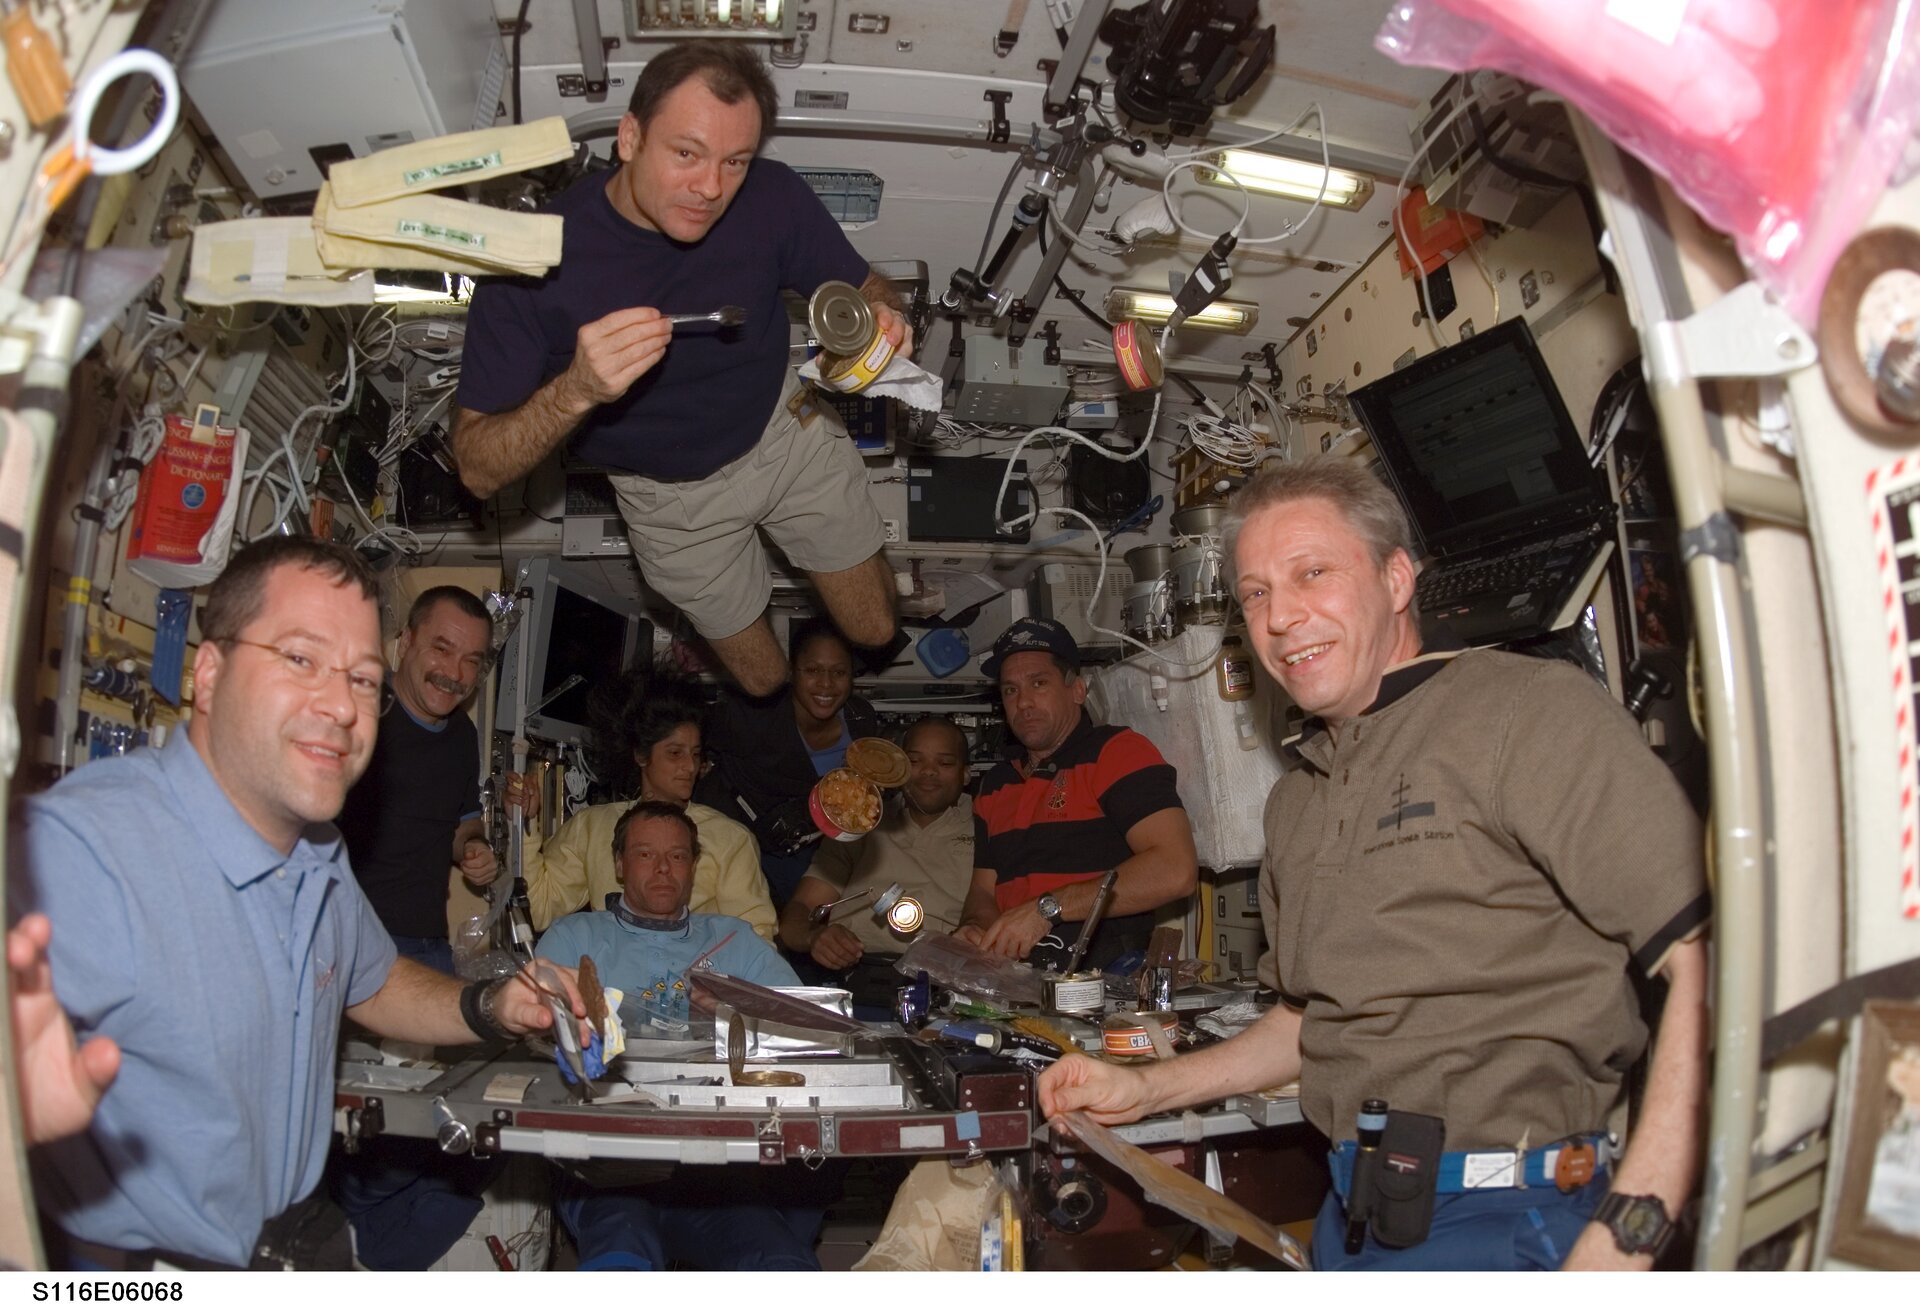 Shuttle and Station crews dining together in the Zvezda Module